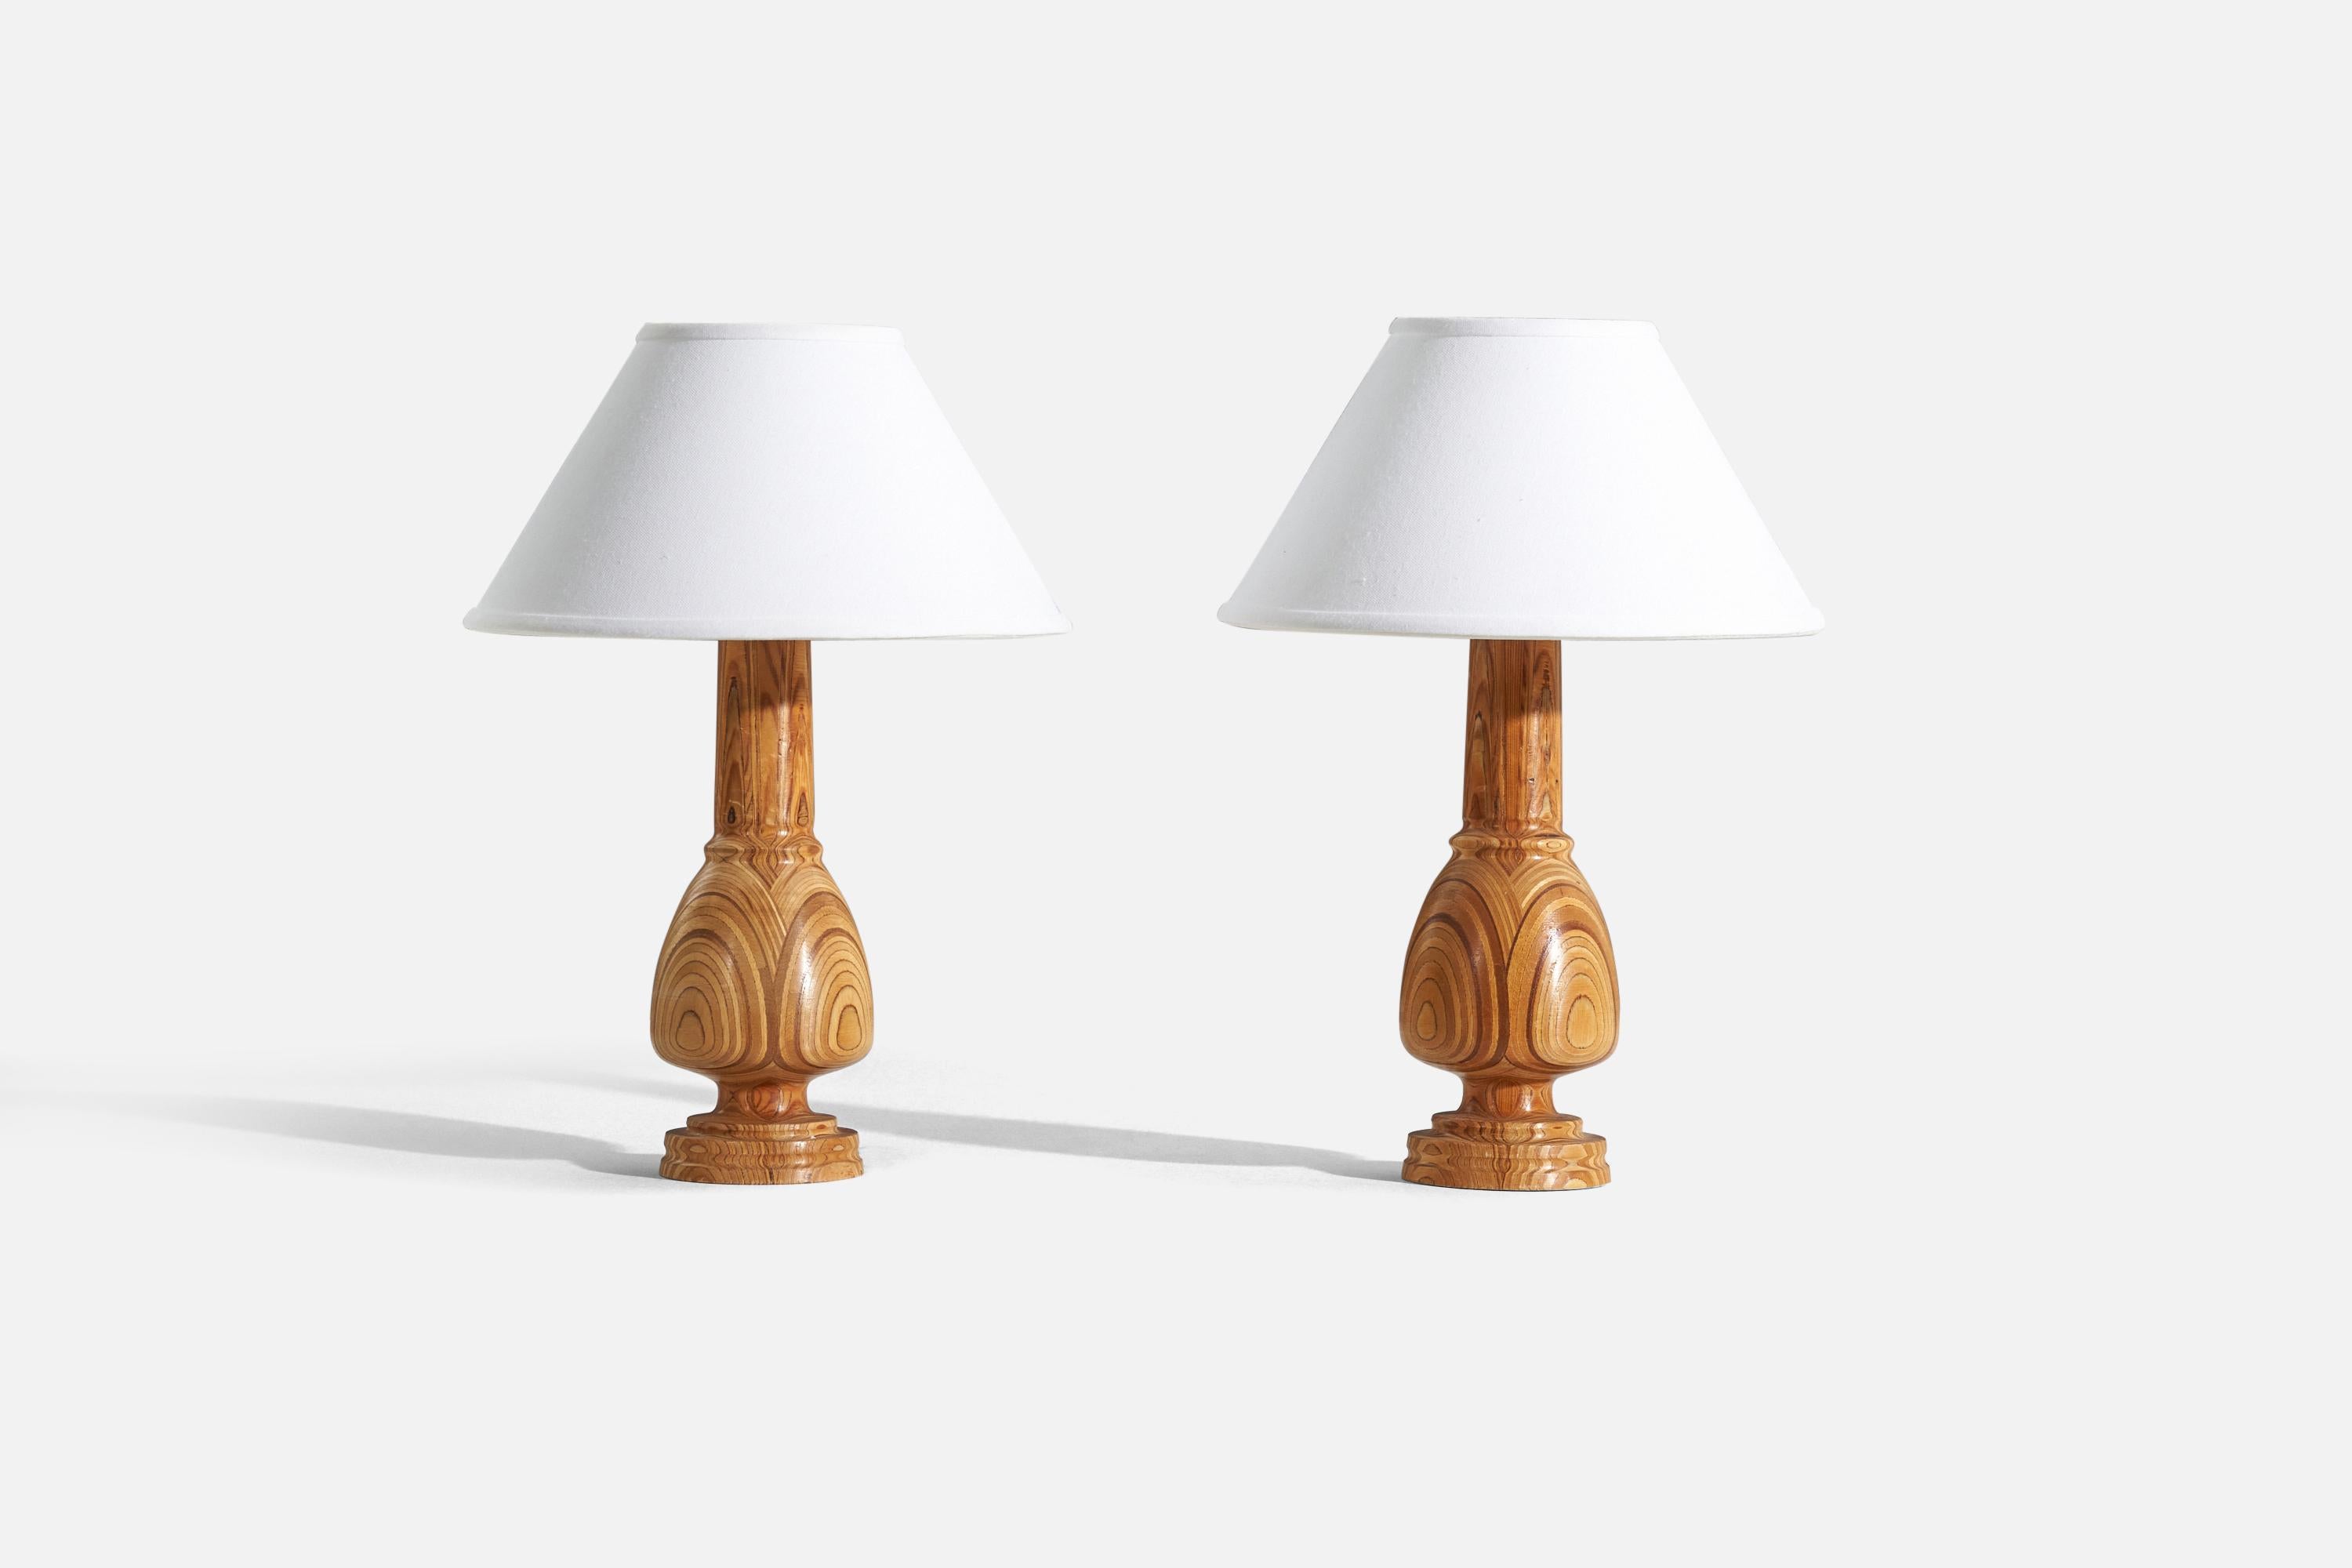 A pair of laminated wood table lamps, designed and produced in Sweden, 1976.

Sold without lampshade. 
Dimensions of lamp (inches) : 14.3125 x 4.5 x 4.5 (H x W x D)
Dimensions of shade (inches) : 5 x 12.25 x 7.25 (T x B x H)
Dimension of lamp